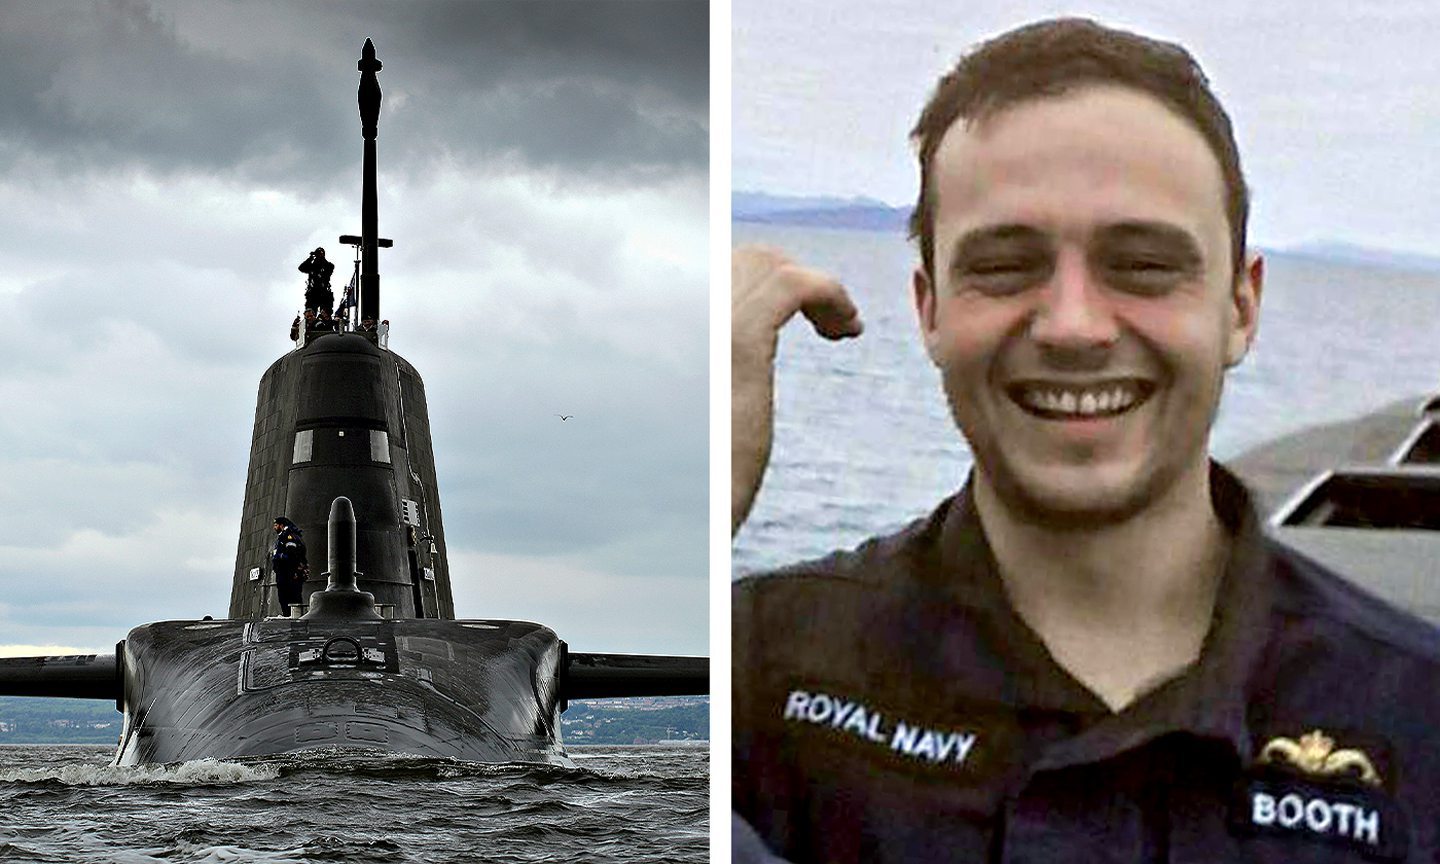 Submariner Gary Booth will not lose his Navy job, the court was told.